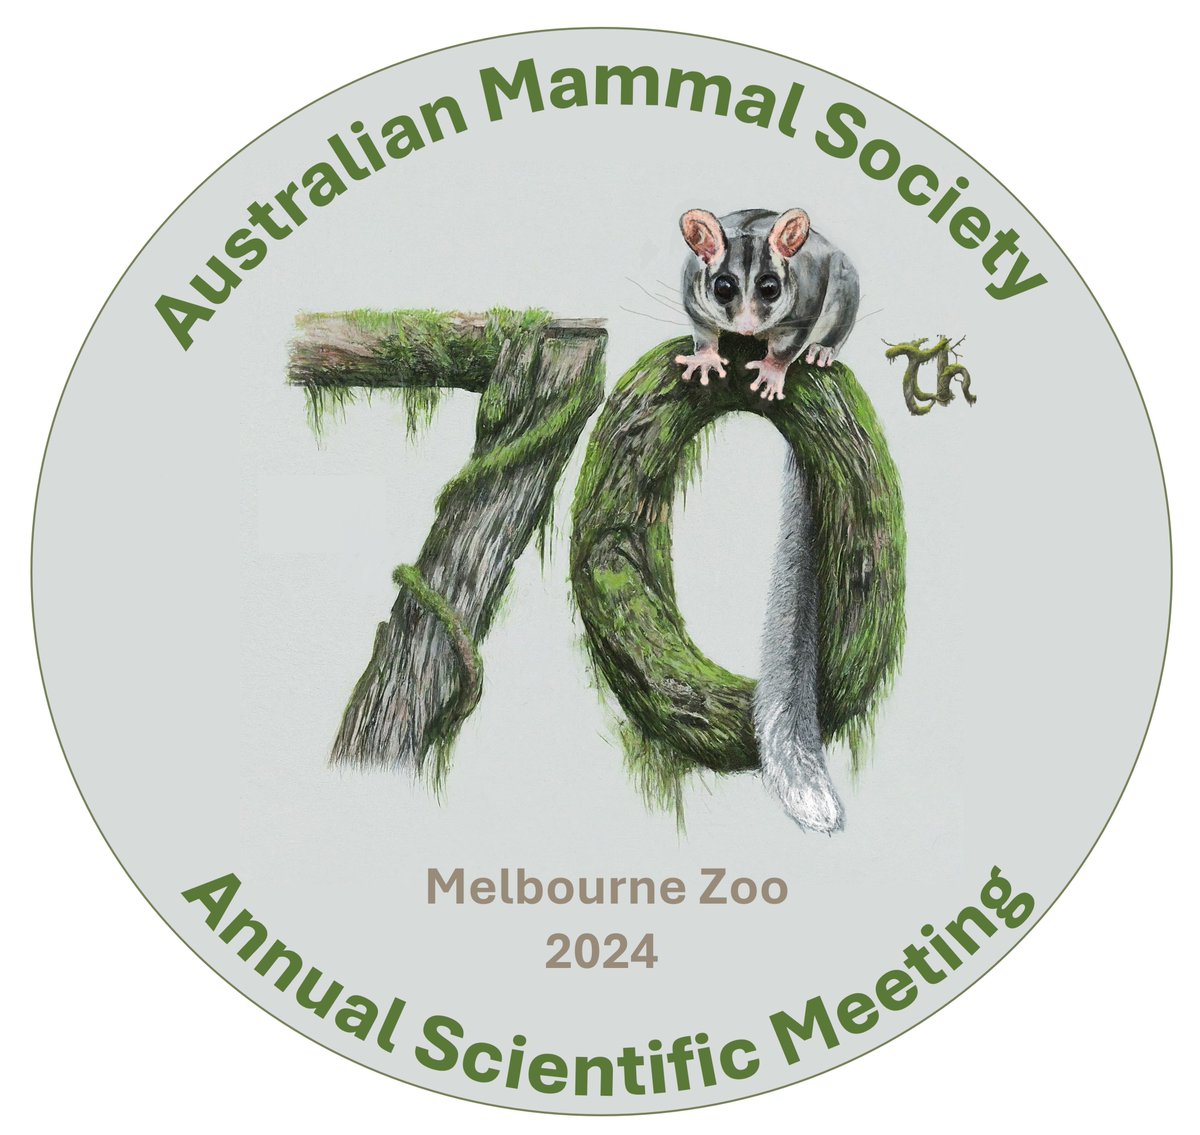 .@AusMammals's 70th, co-hosted by @Deakin & @ZoosVictoria, at Melbourne Zoo, July 1-4, is going to be a cracker! Abstracts close May 31st australianmammals.org.au/conferences/co… Early bird registration closes June 3rd events.humanitix.com/70th-annual-sc… Artwork (Leadbeater's possum) - @Darcy_Watchorn